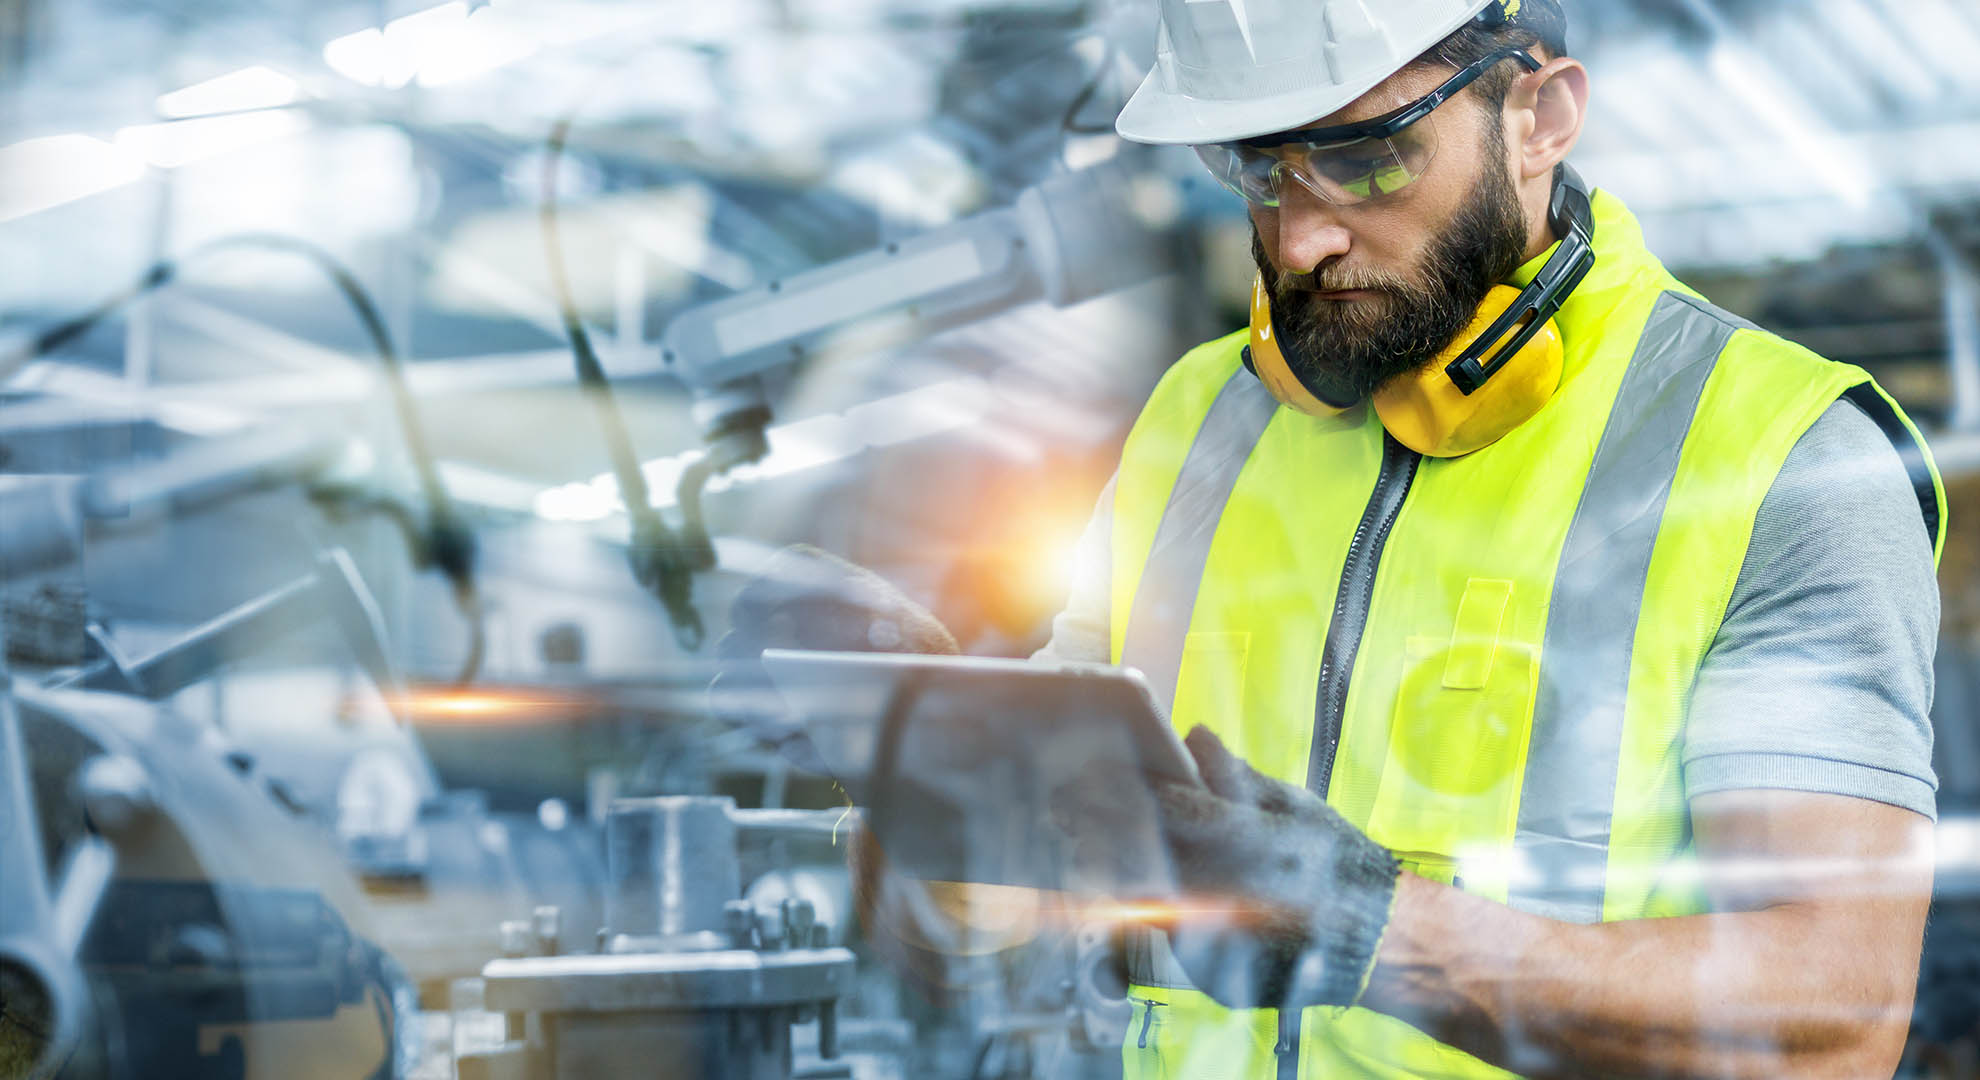 Intelligent maintenance software helps your servicing team make decisions faster and more easily.